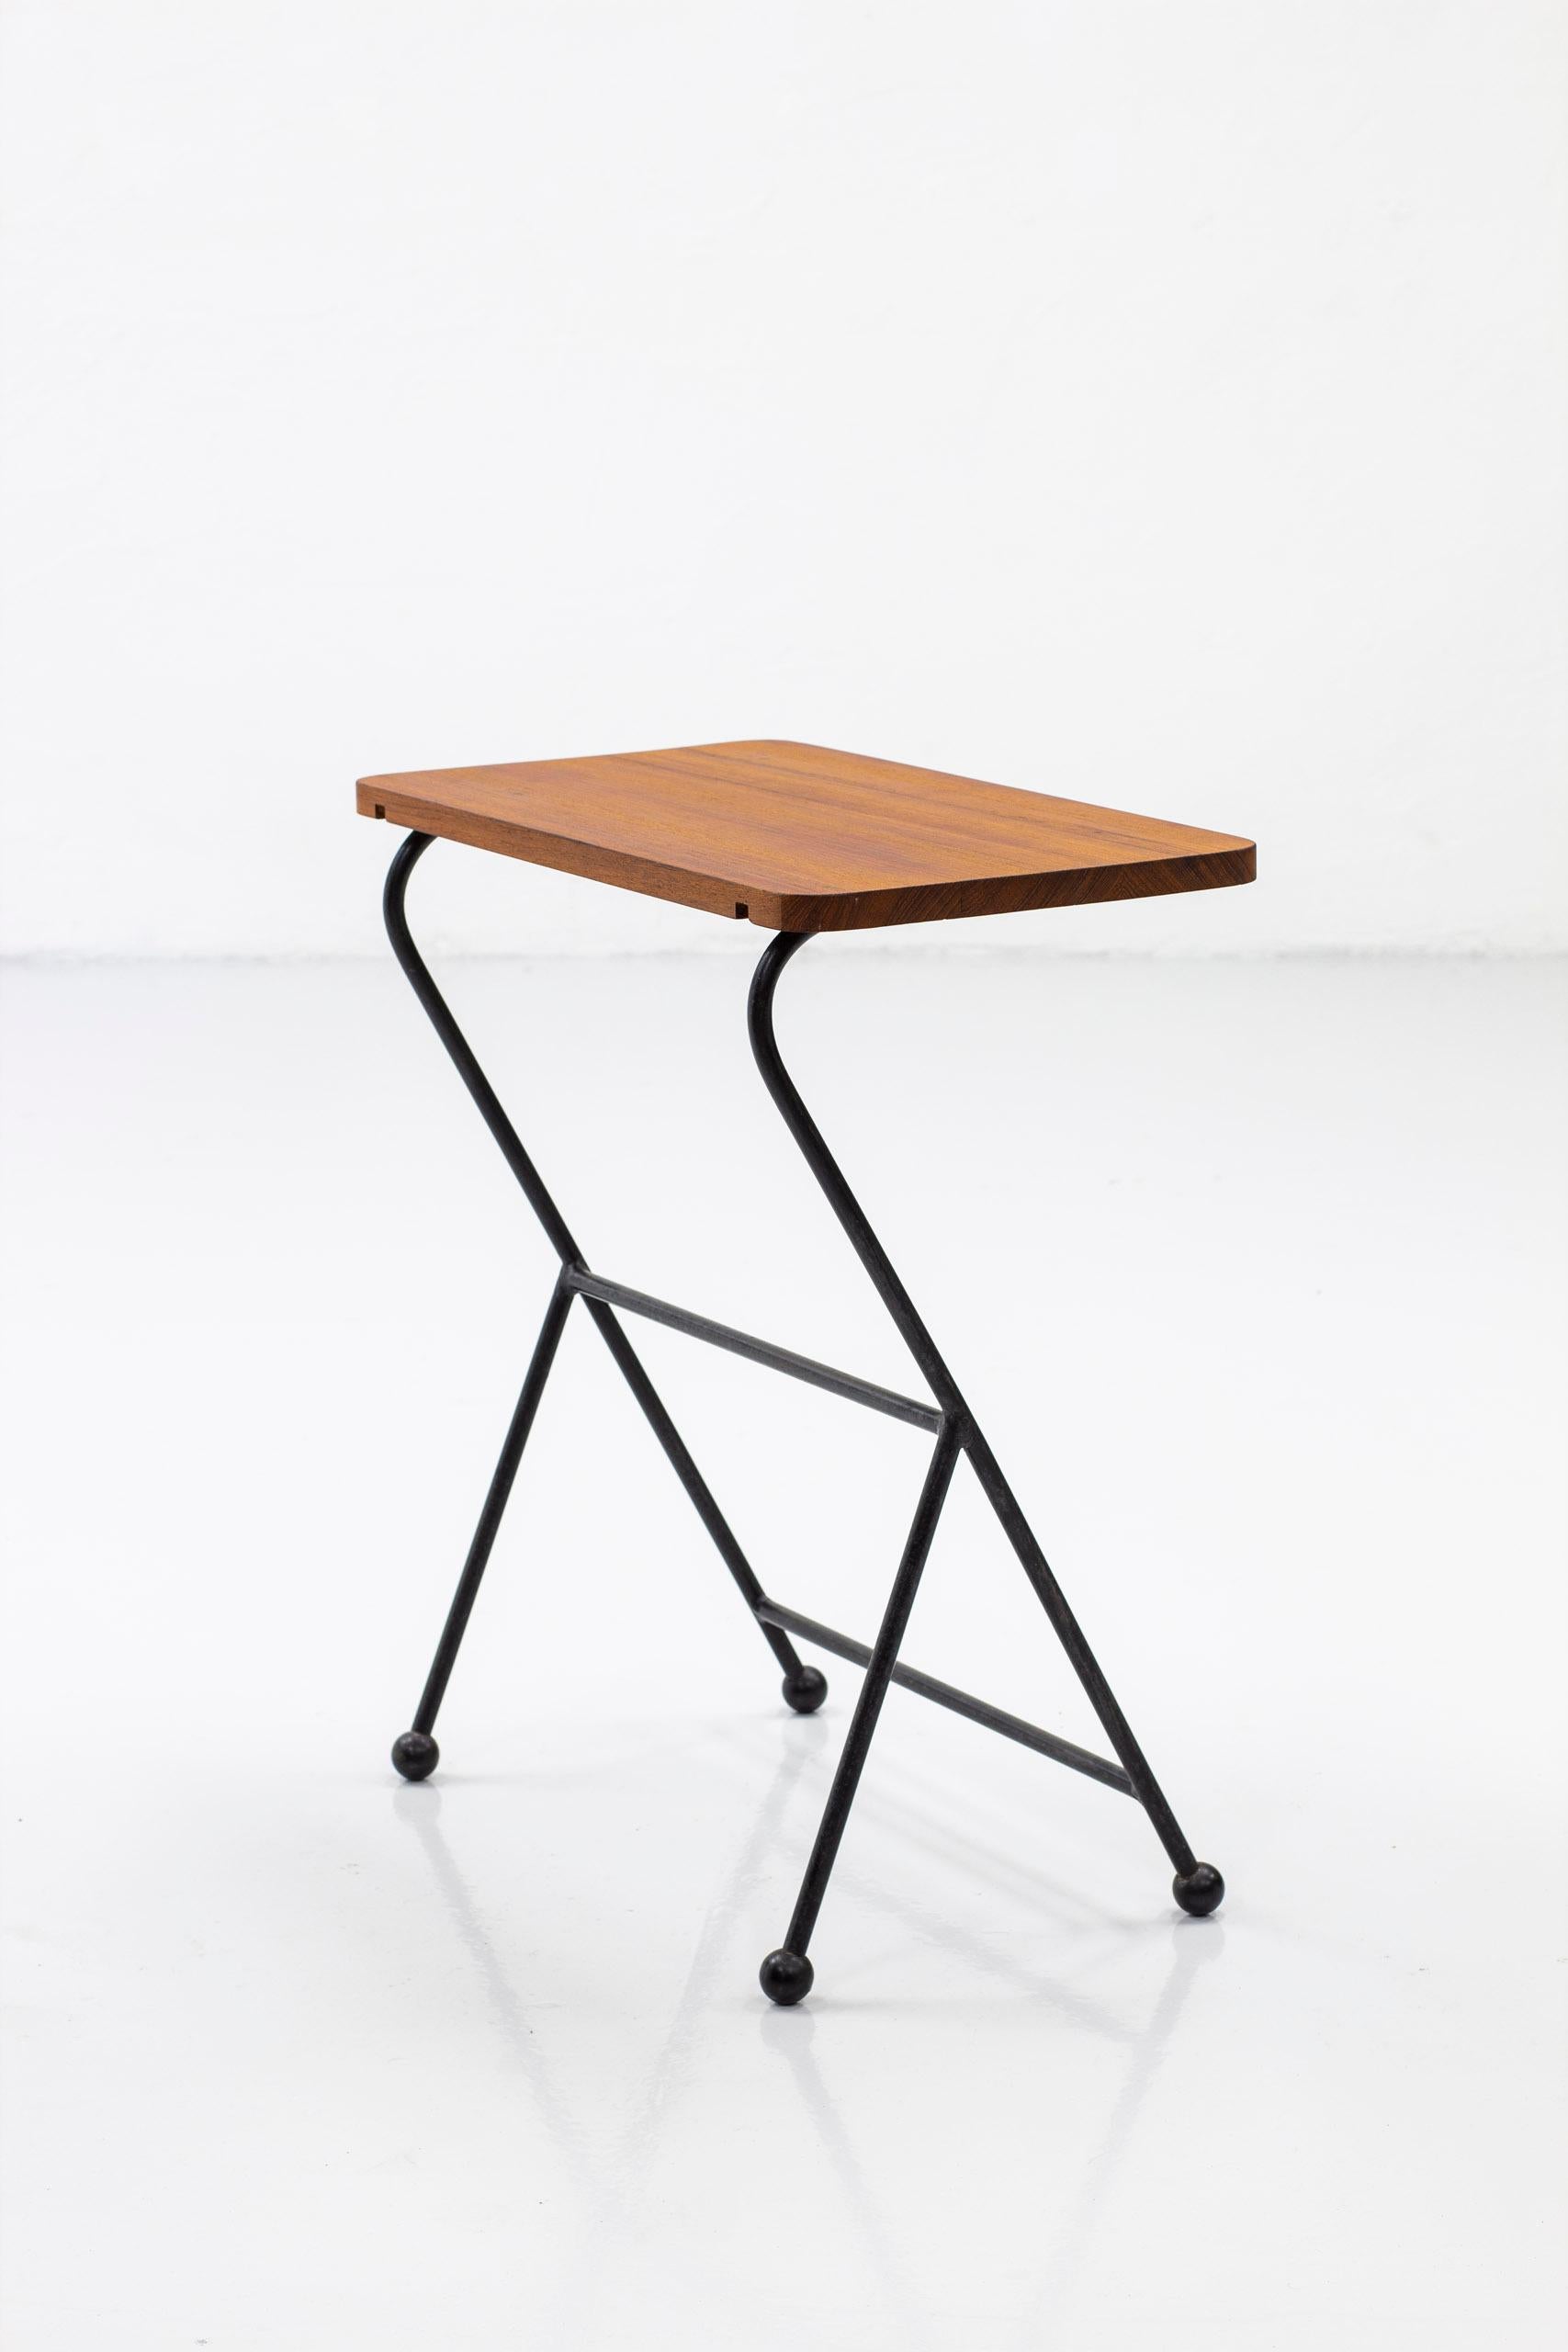 Mid-20th Century Side Table in Teak Designed and Produced in Sweden, 1950s